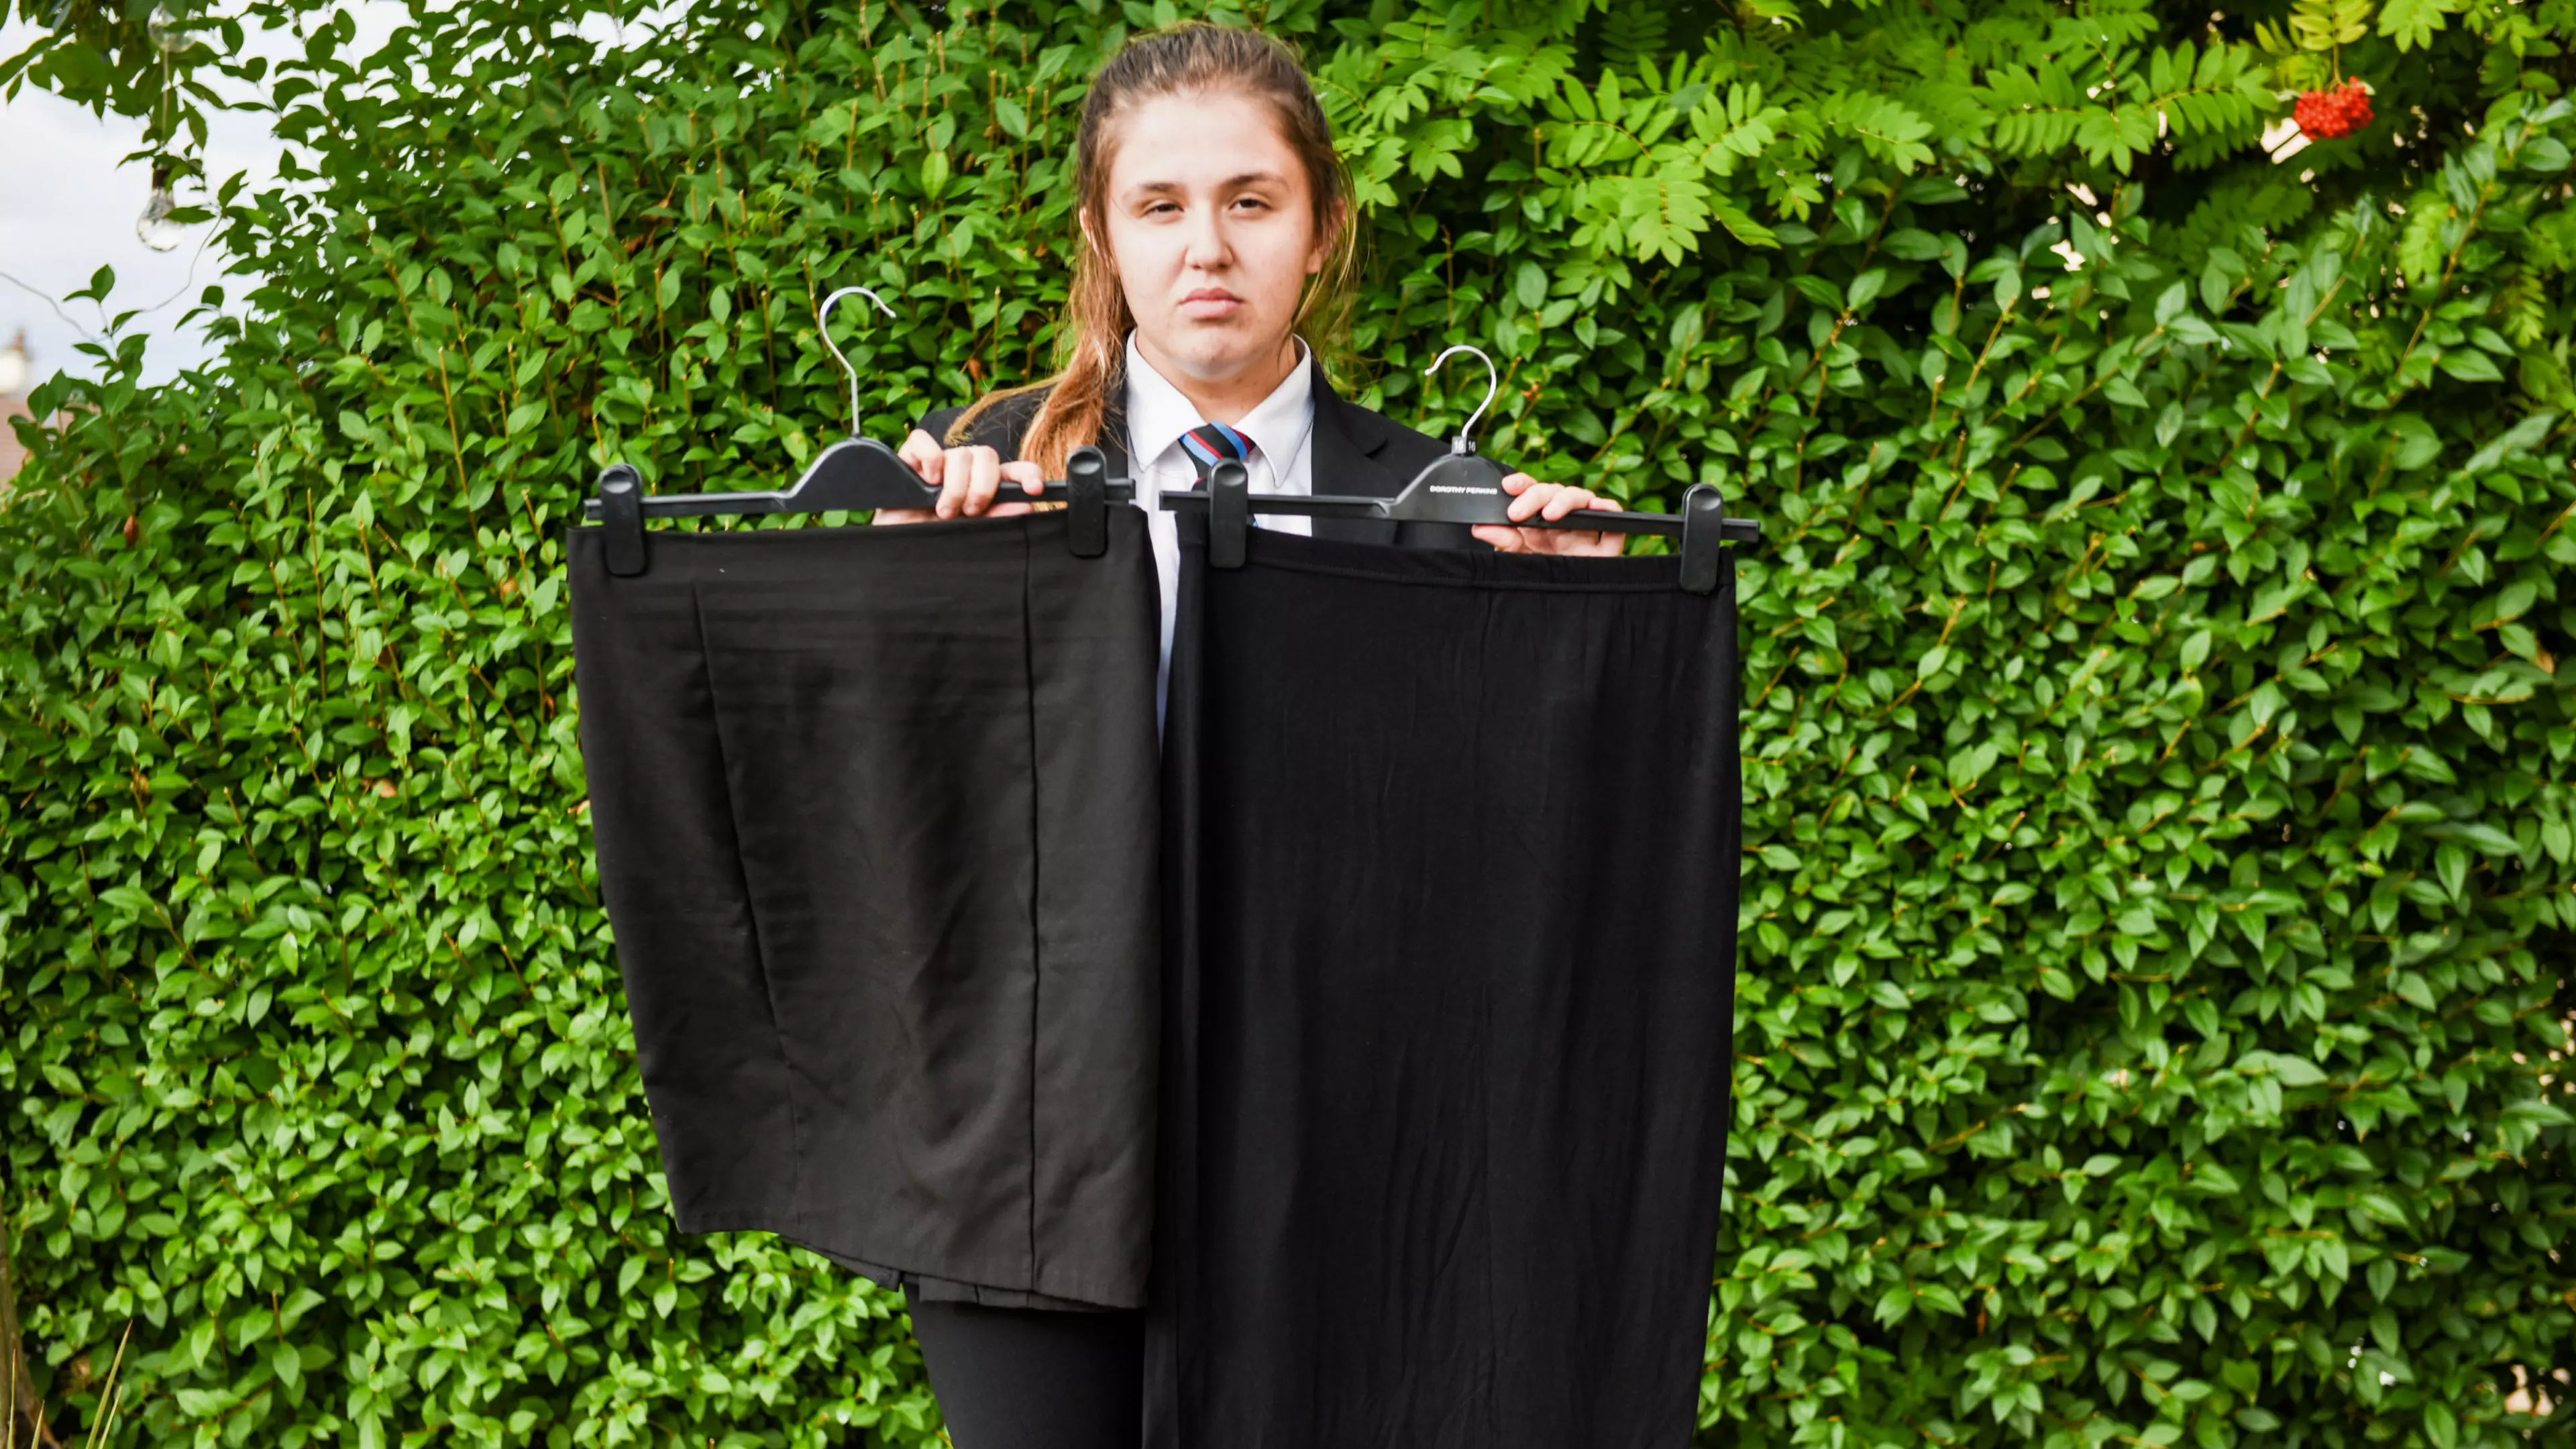 Schoolgirl 'Forced To Wear Shorter Skirt' Because Of It's Made Of 'Wrong Material'